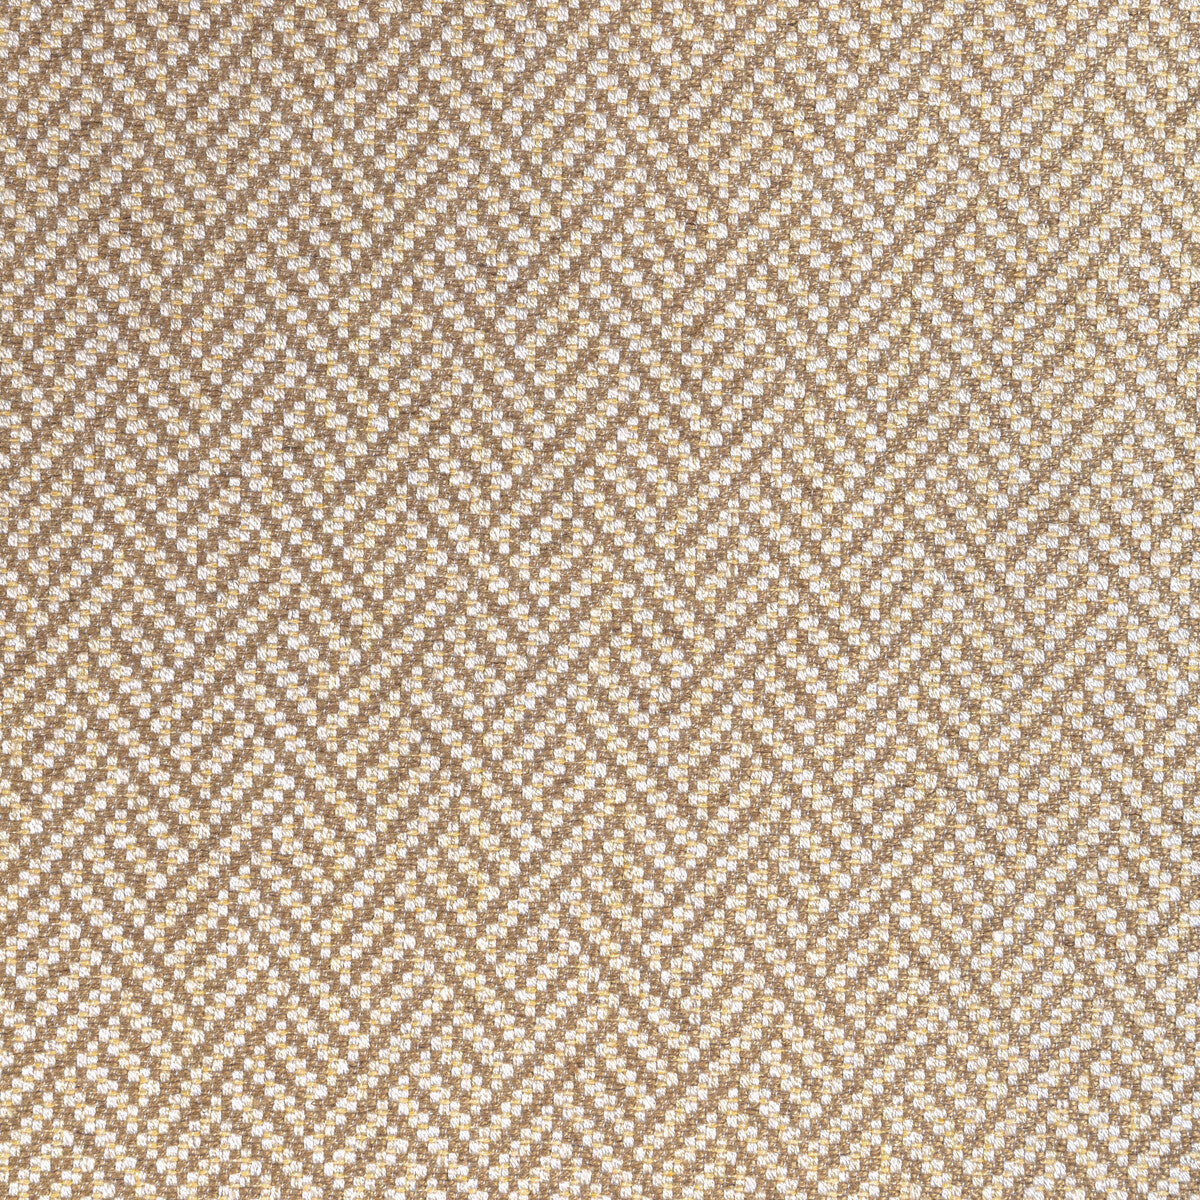 Colbert Weave fabric in beige color - pattern 8022108.16.0 - by Brunschwig &amp; Fils in the Lorient Weaves collection